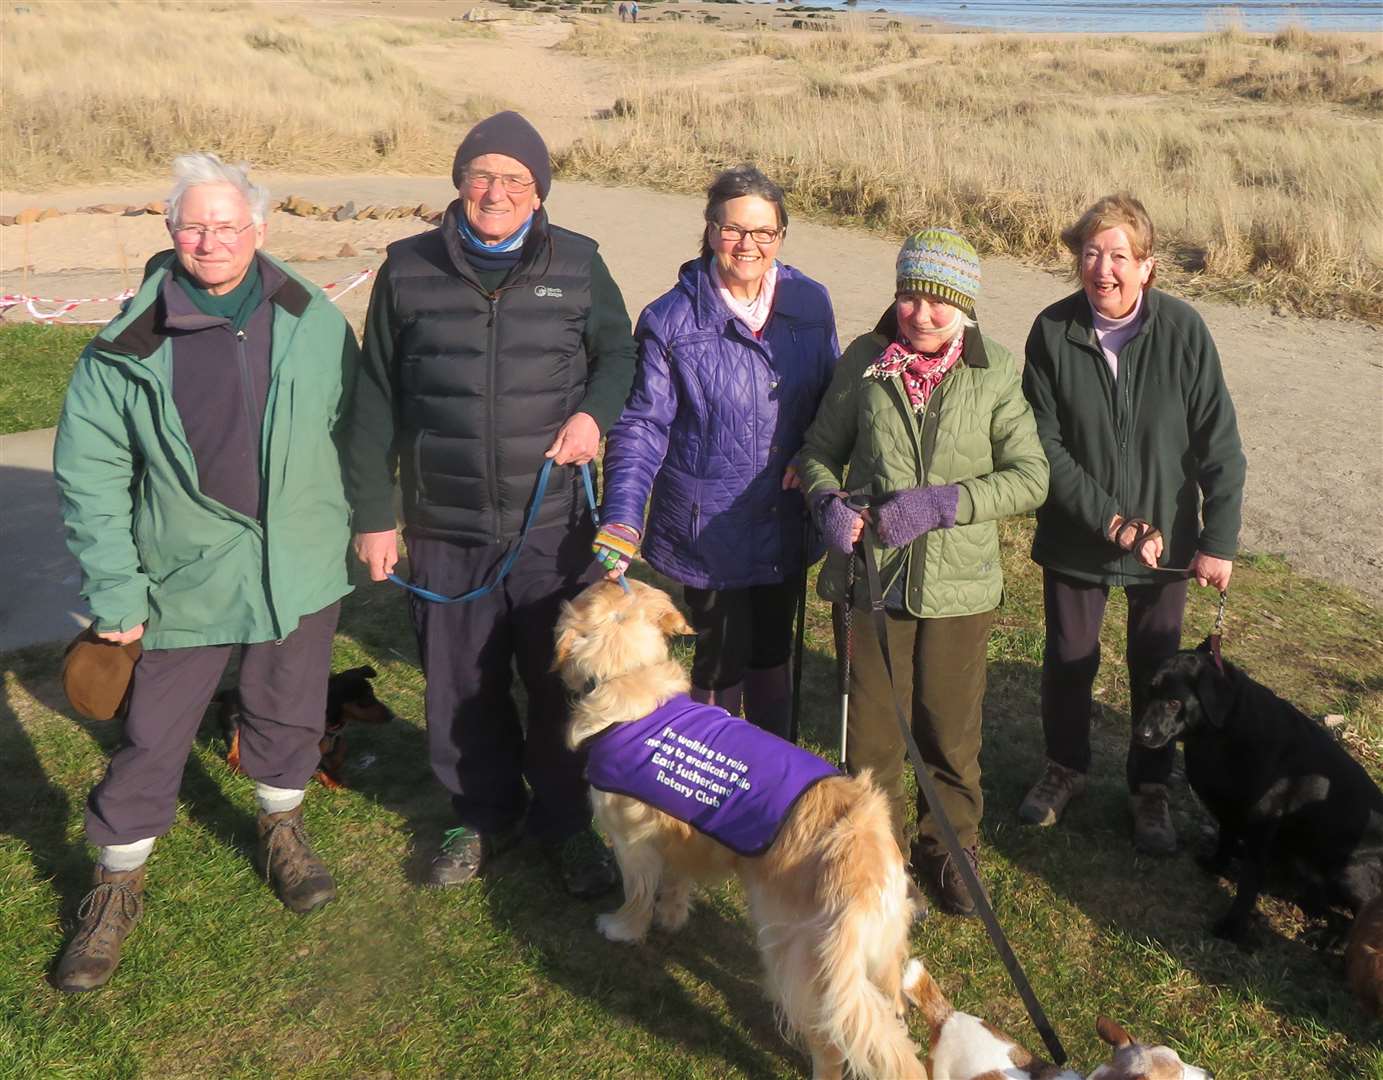 Rotarians enjoyed early spring sunshine during a group walk at Dornoch beach.